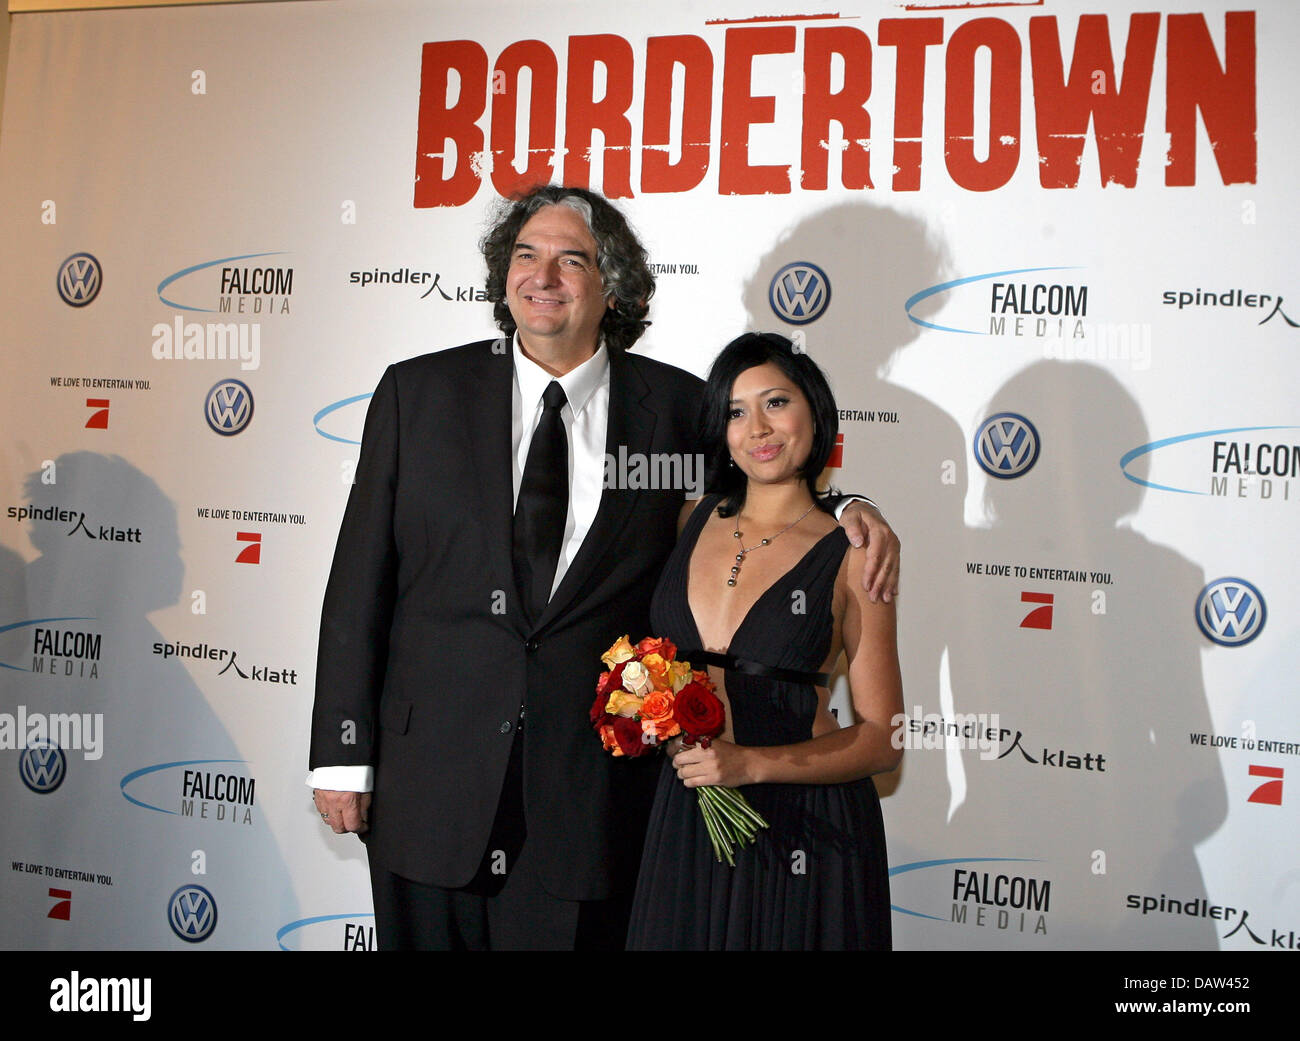 US-American filmmaker Gregory Nava and Mexican actress Maya Zapata arrive at the party for the film 'Bordertown' at the 57th Berlinale Film Festival in Berlin, Germany, Thursday, 15 February 2007. Photo: Jens Kalaene Stock Photo